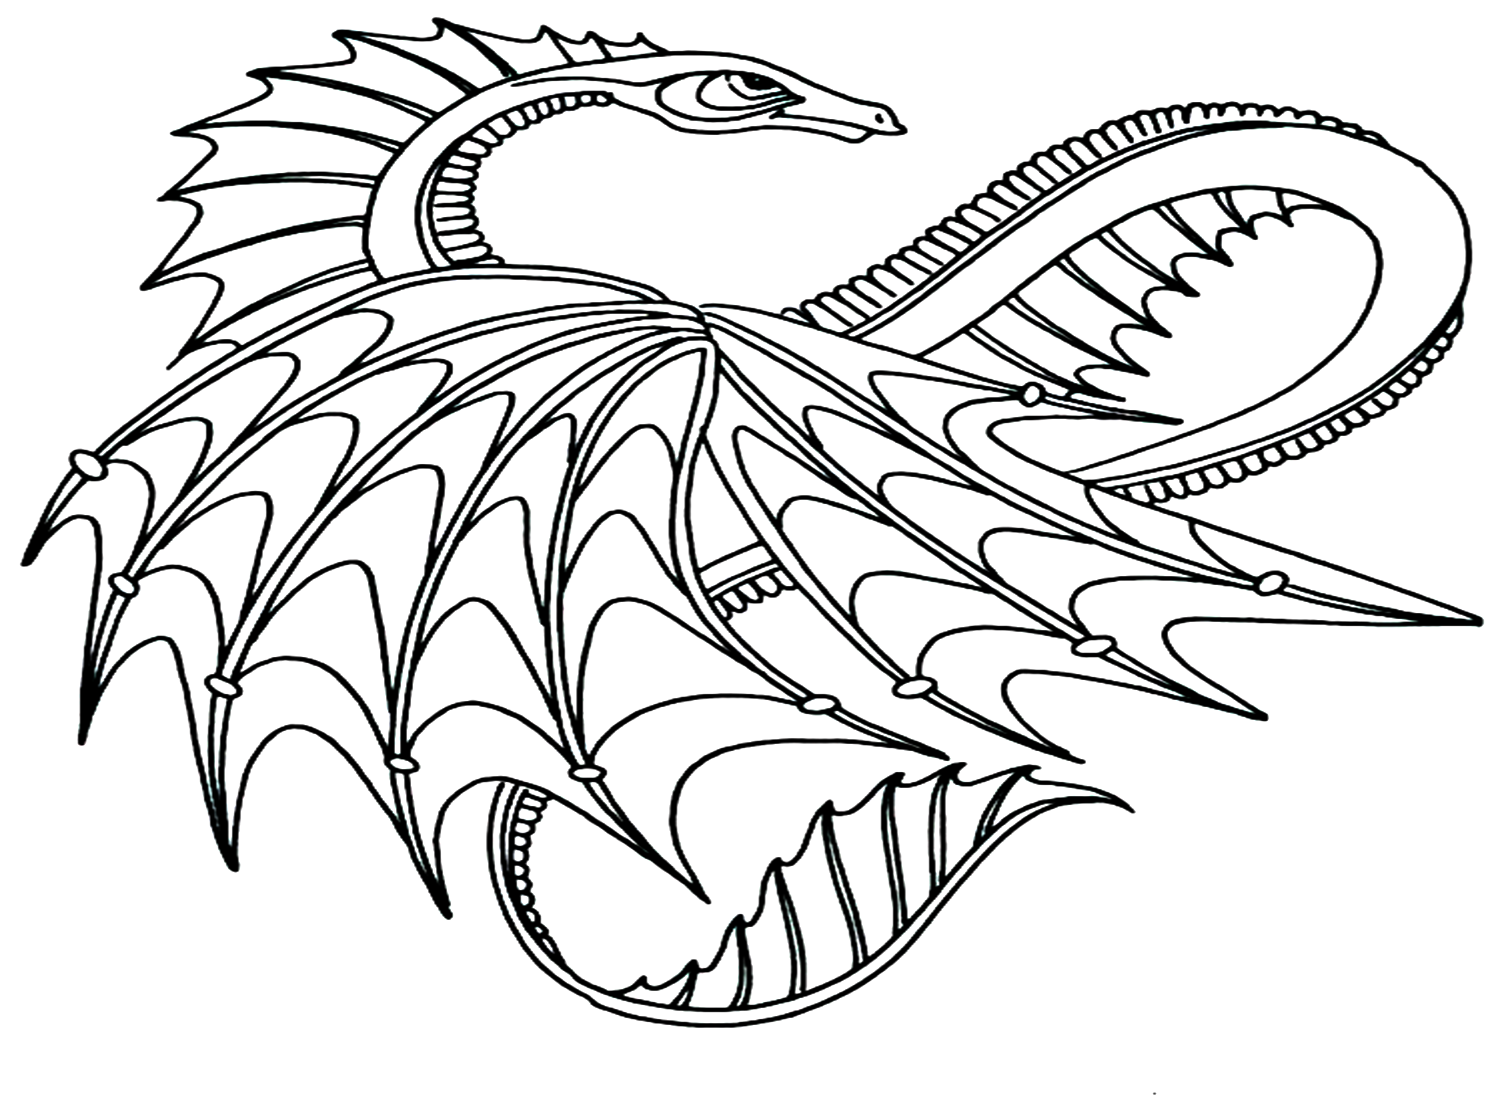 Throughout Dragon Coloring Pages